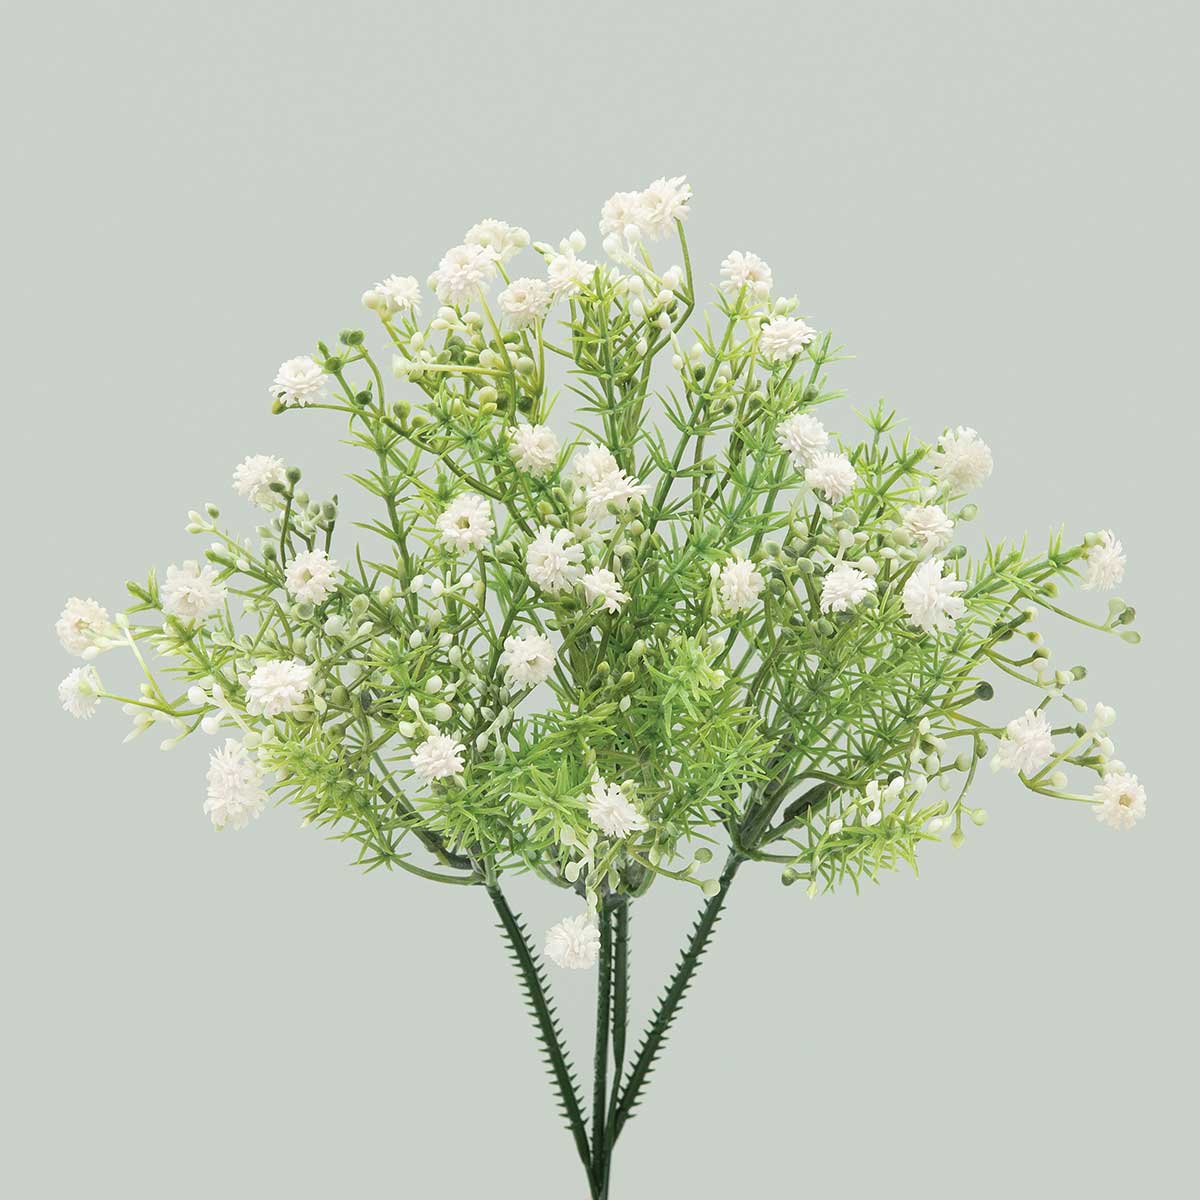 BUNDLE OF 6 FLOWERING GRASS 8IN X 9.5IN GREEN/WHITE